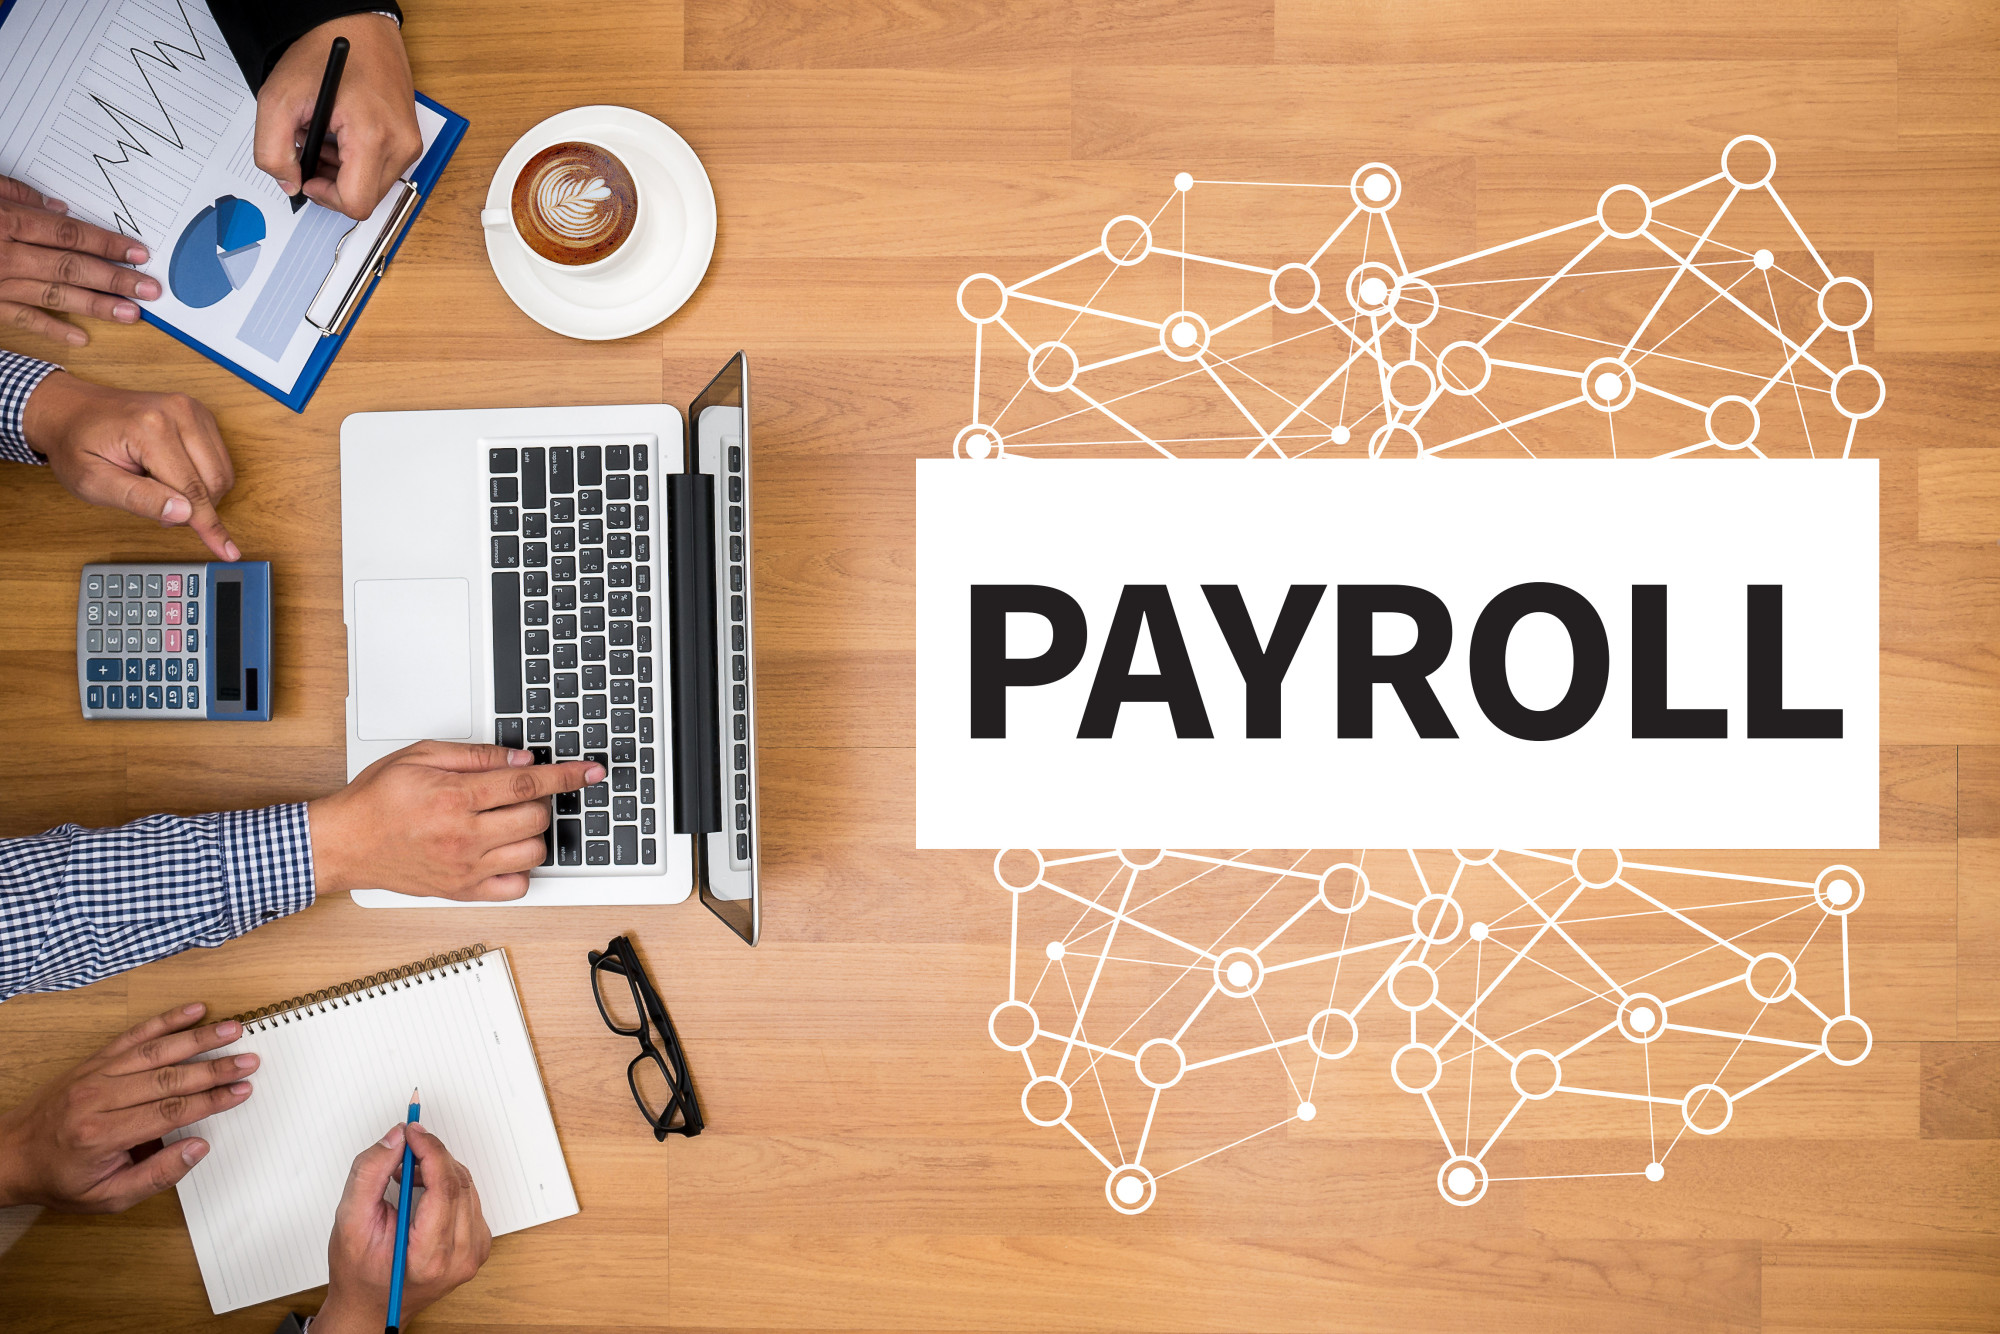 Managing and keeping track of payroll expenses should be every business's top priority. Learn what payroll expenses are and more here.